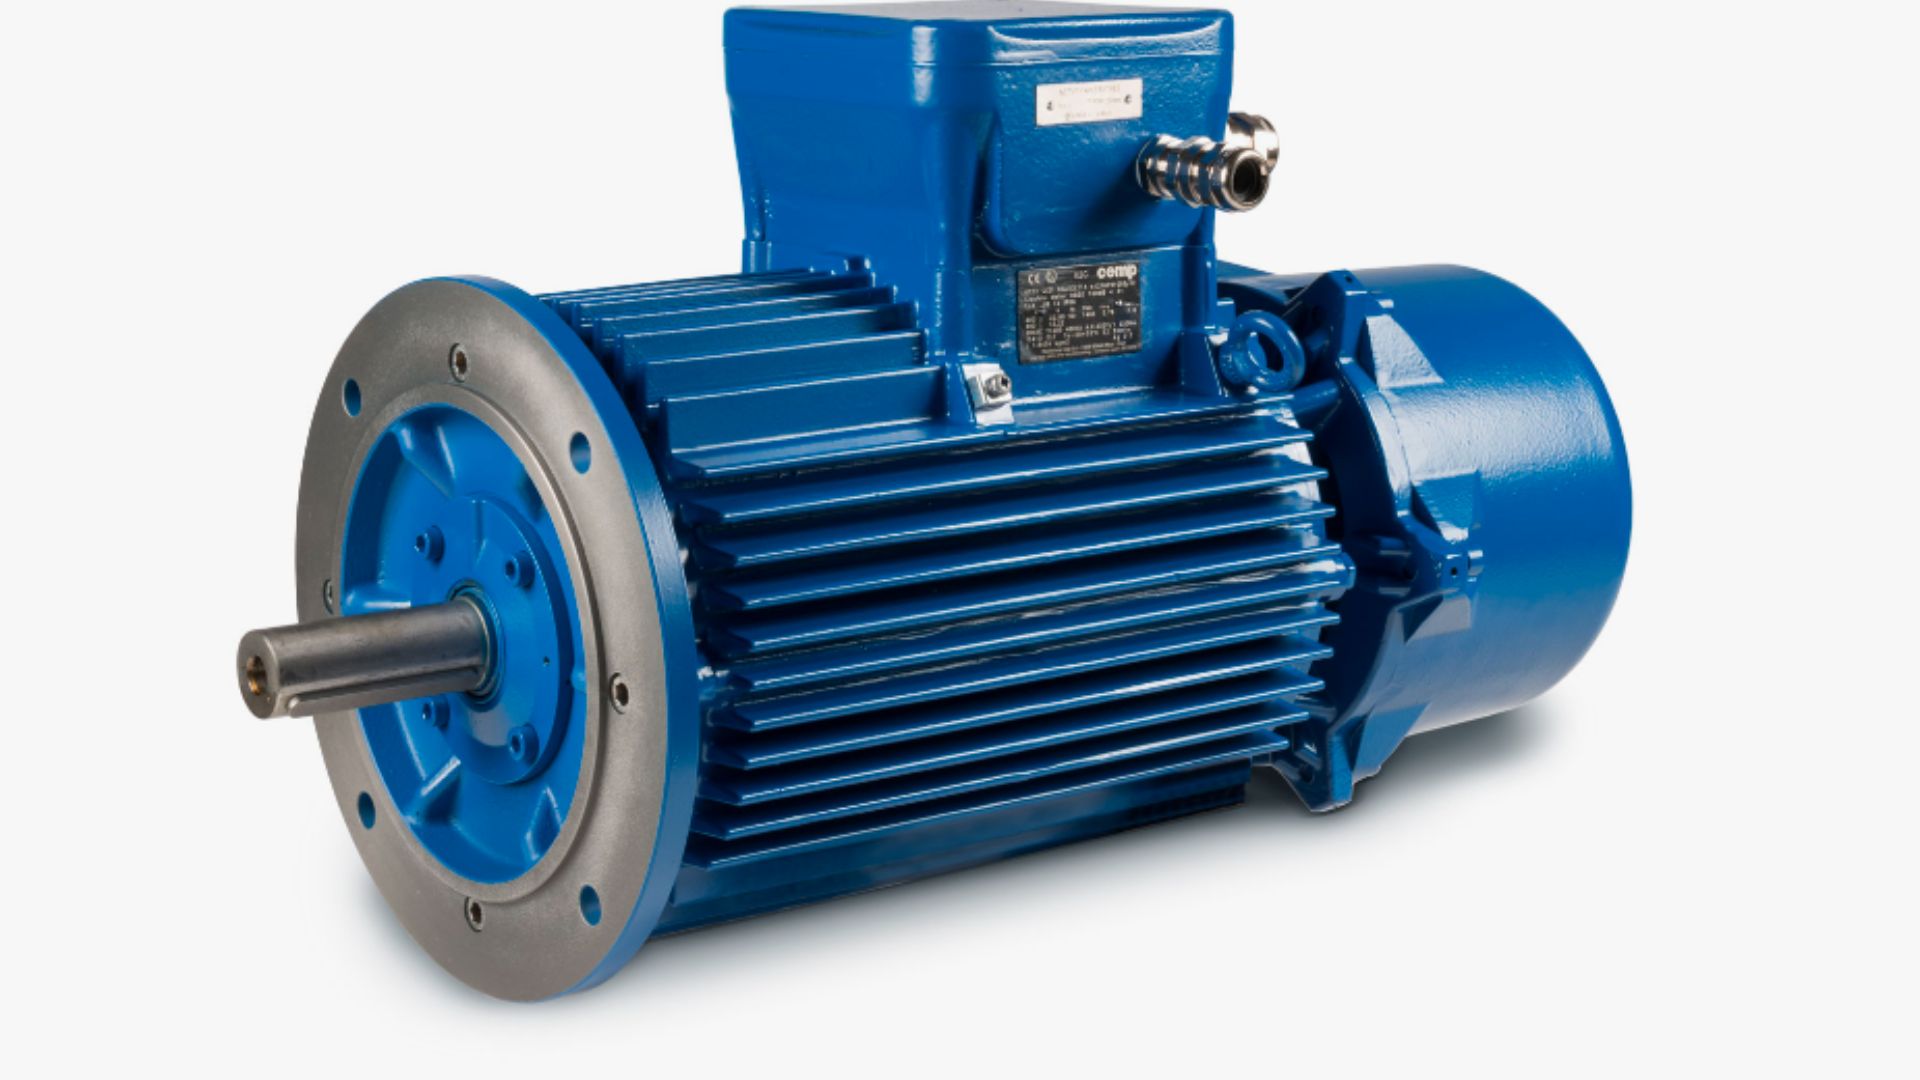 Know thе Ins and Outs of Explosion Proof Motors